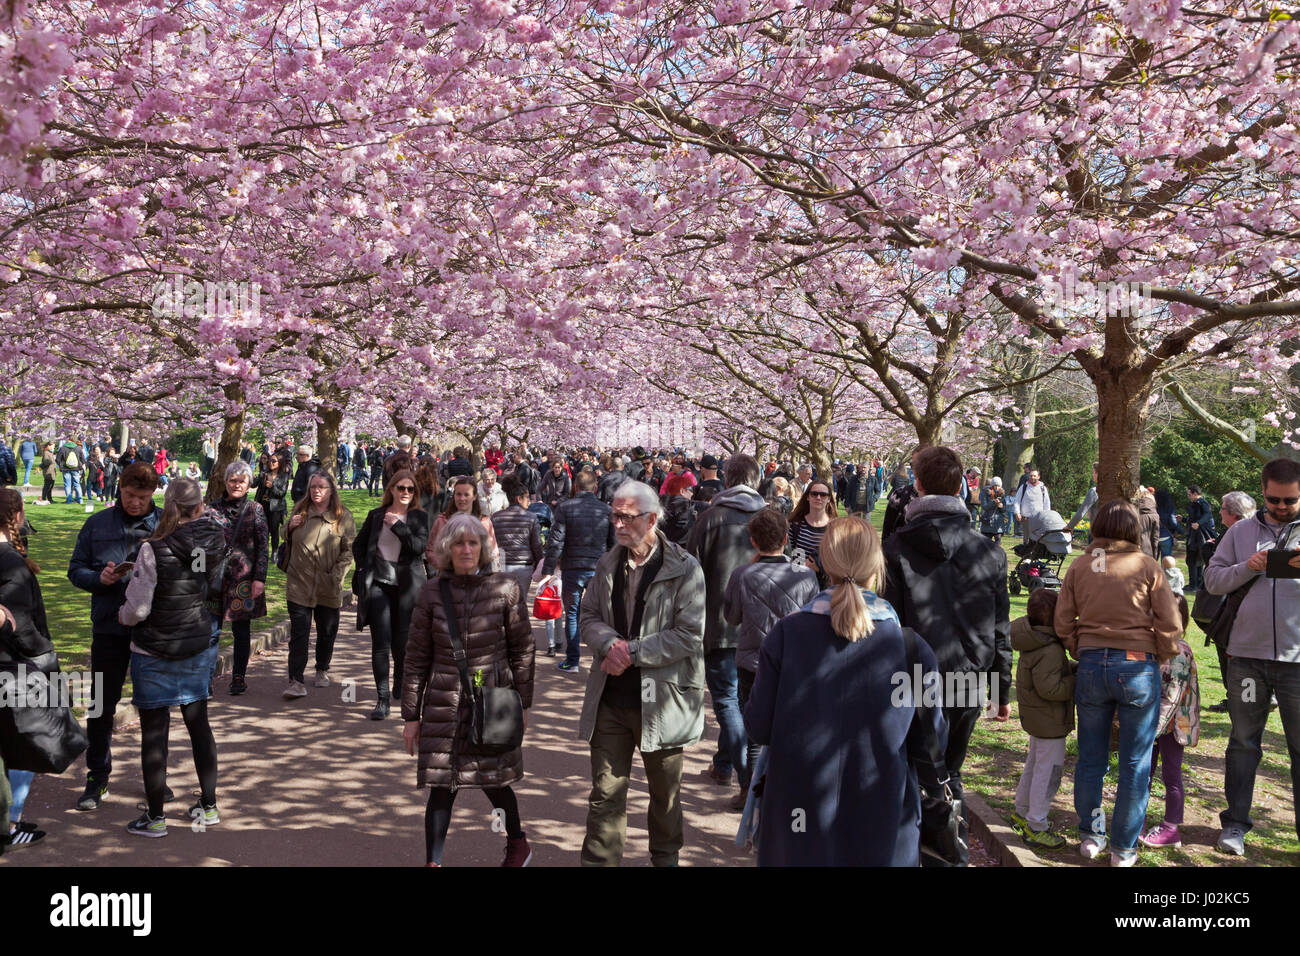 Bispebjerg, Copenhagen, Denmark. 9th April 2017. The Cherry Blossom Avenue at Bispebjerg Cemetery has become extremely popular in recent years. This Palm Sunday, in a sudden spell of warm sunshine in an otherwise rather cool period in April, thousands of tourists, visitors and Copenhageners visited the avenue for a walk under the most beautiful canopy. Credit Niels Quist / Alamy Live News. Stock Photo